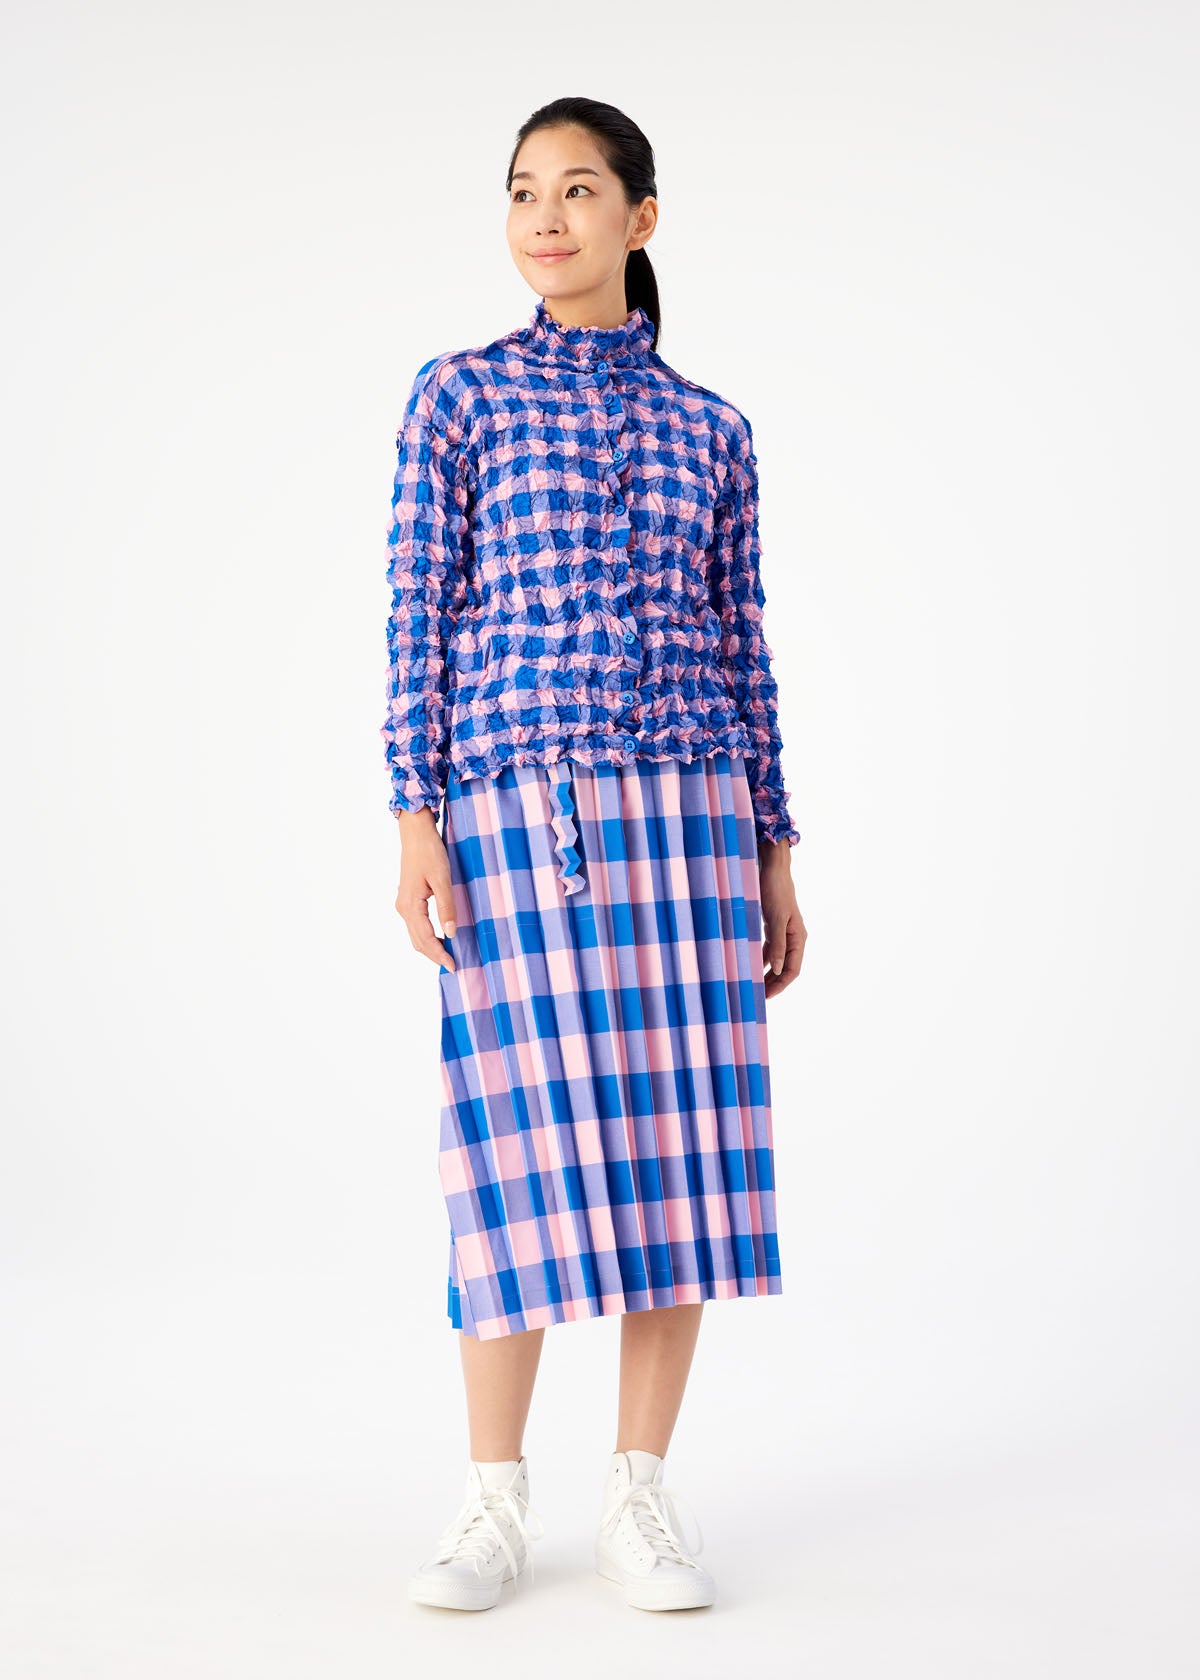 GINGHAM CHECK PLEATS BOTTOM SKIRT | The official ISSEY MIYAKE